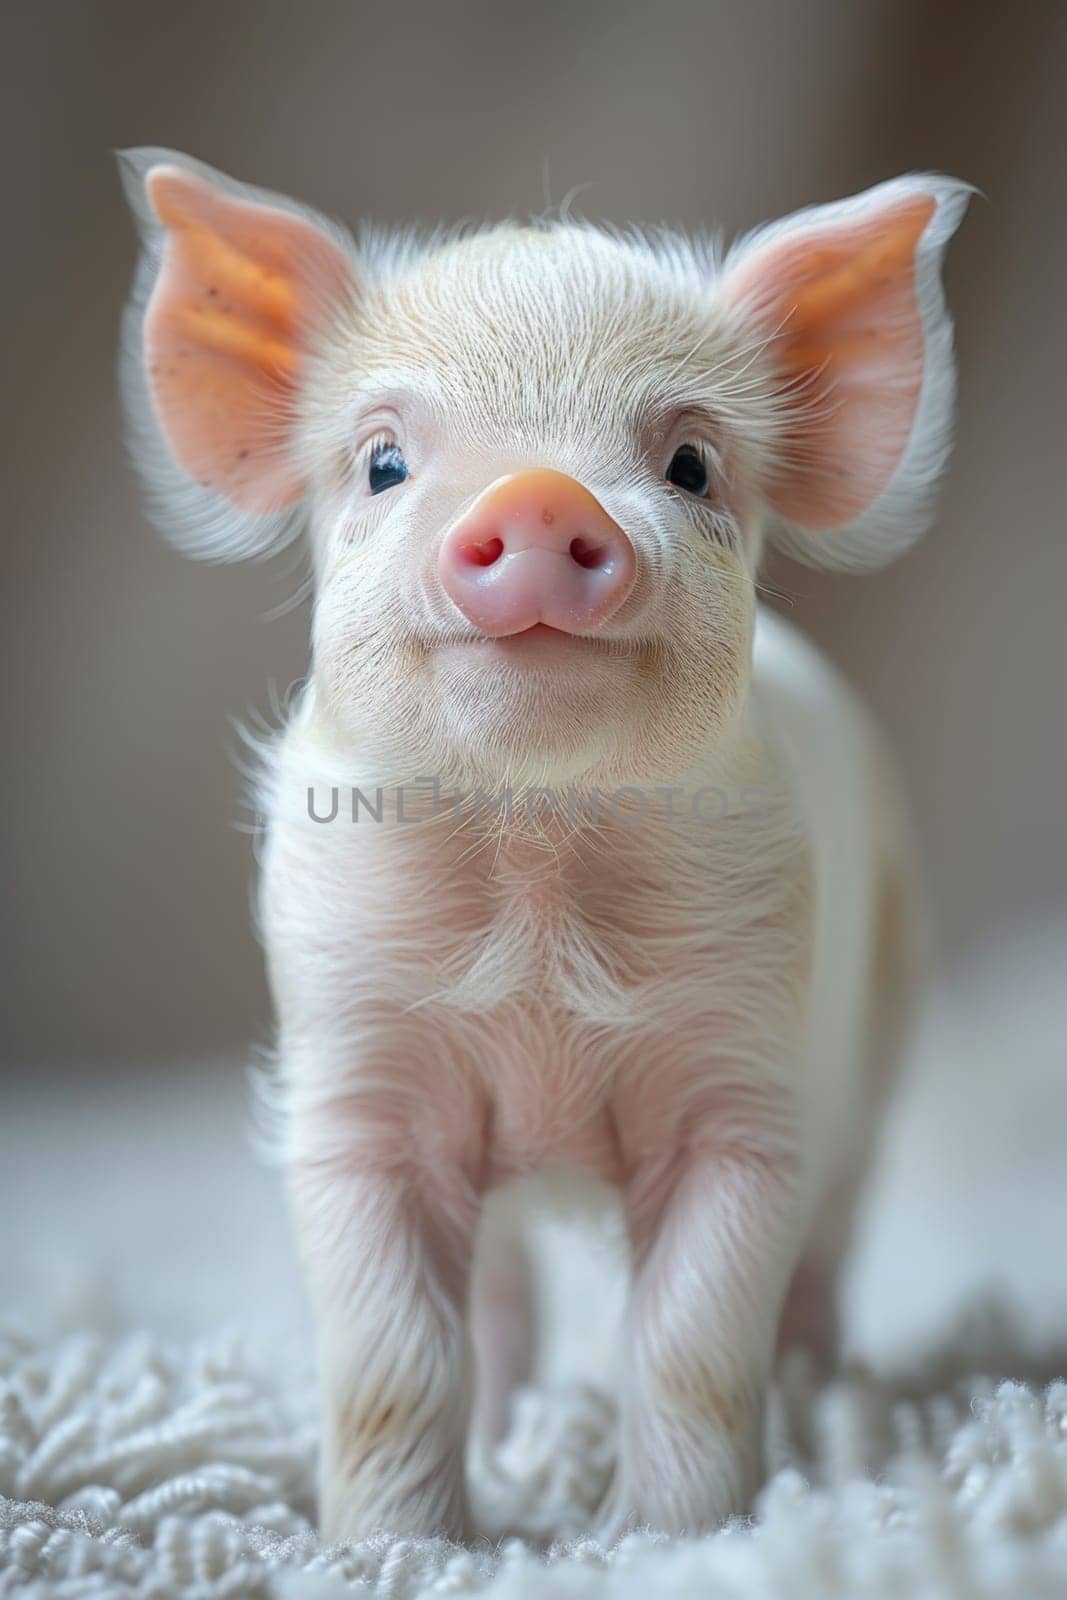 A newborn piglet poses for the camera by Lobachad